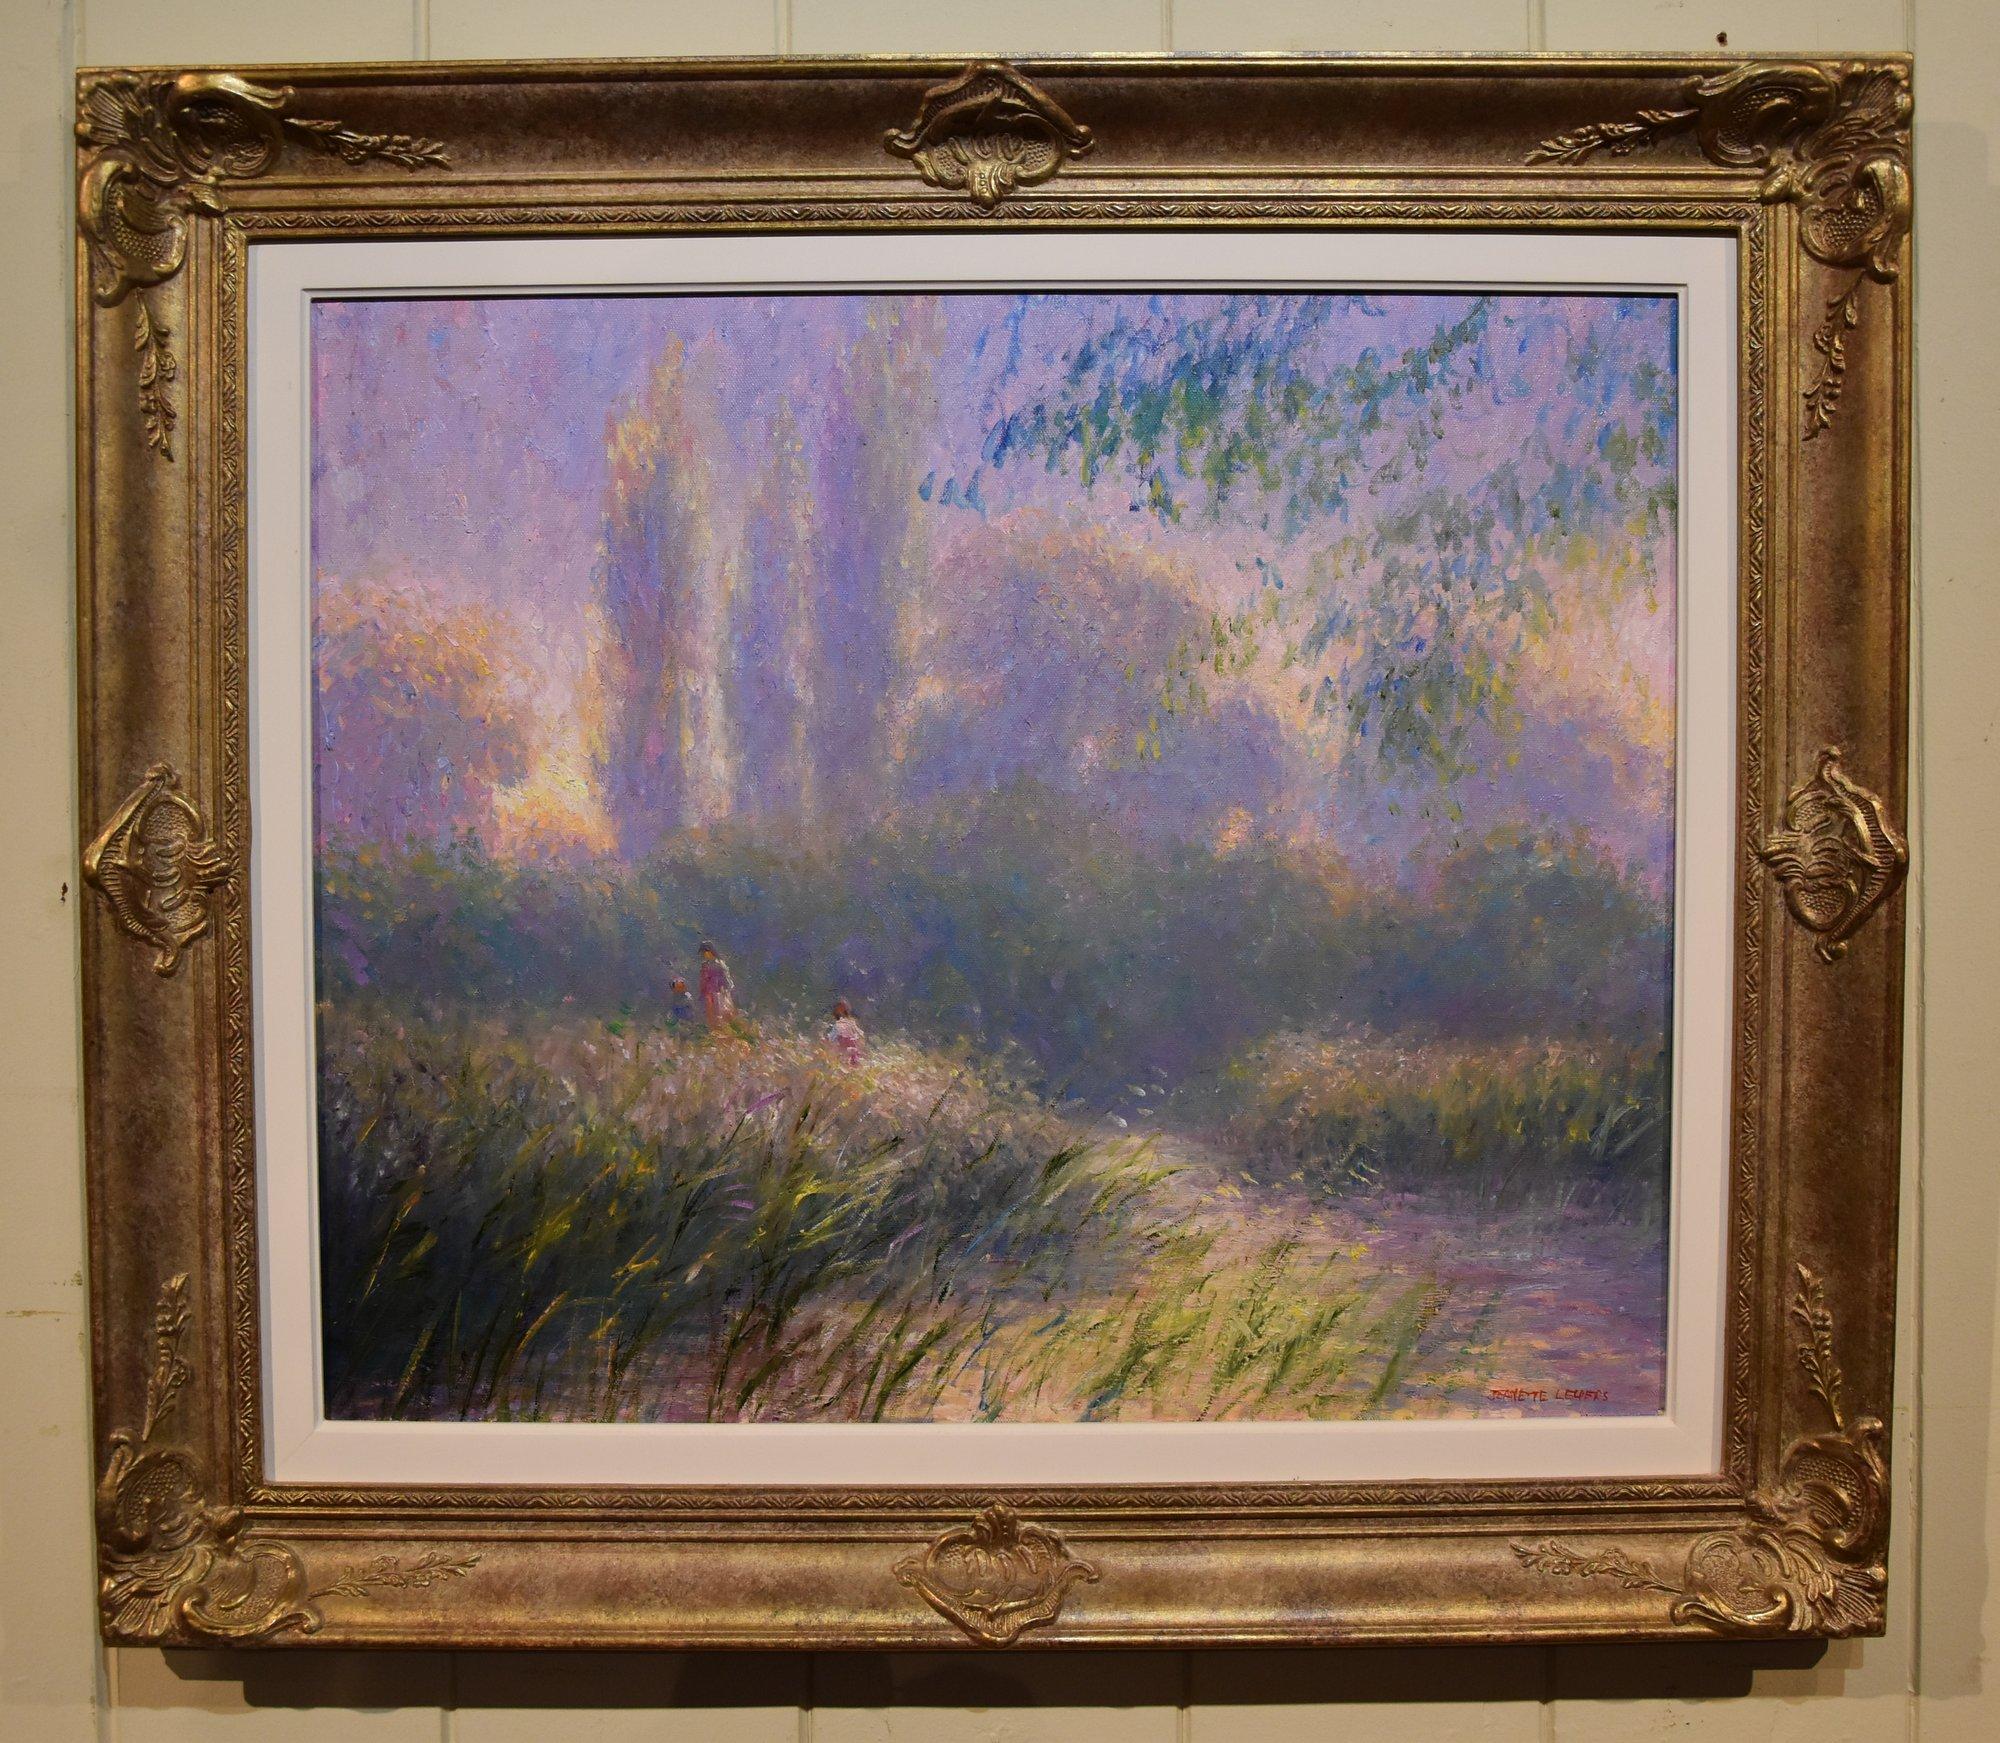 jeanette levers Landscape Painting - Oil Painting by Jeanette Levers "A Quiet Evening"